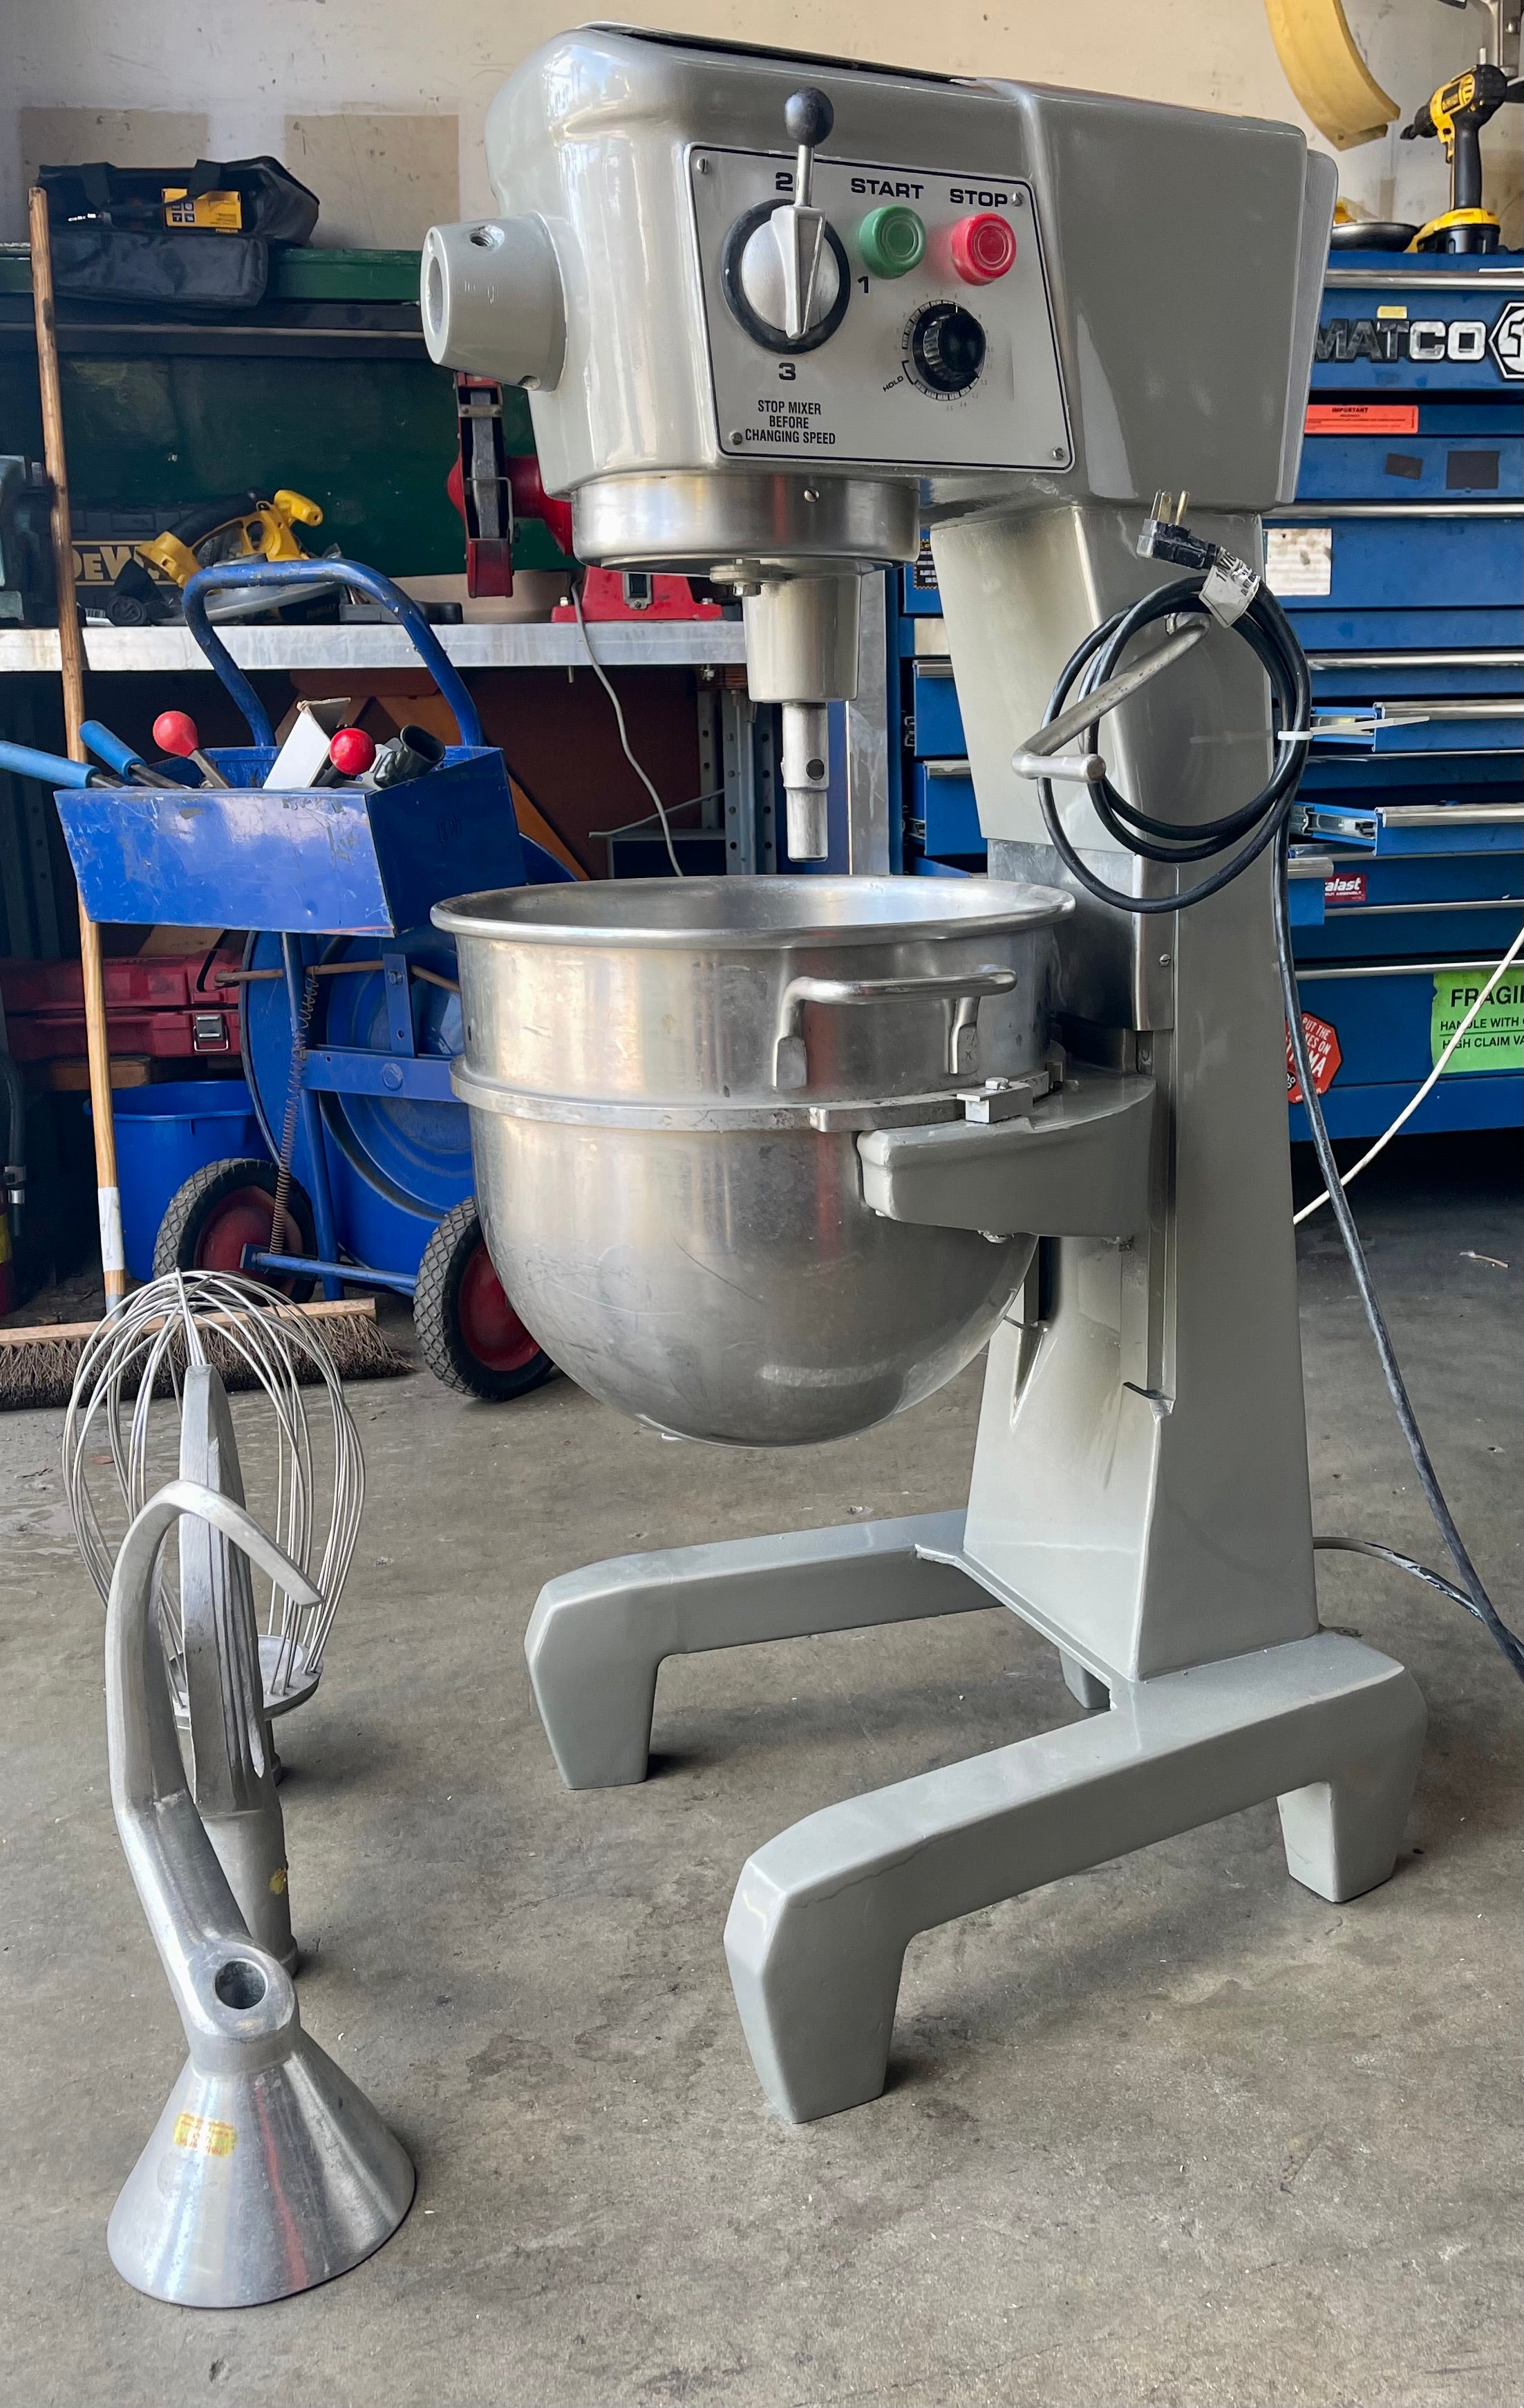 Hobart D300t 30 quart mixer 115V comes with a stainless steel bowl and three attachments